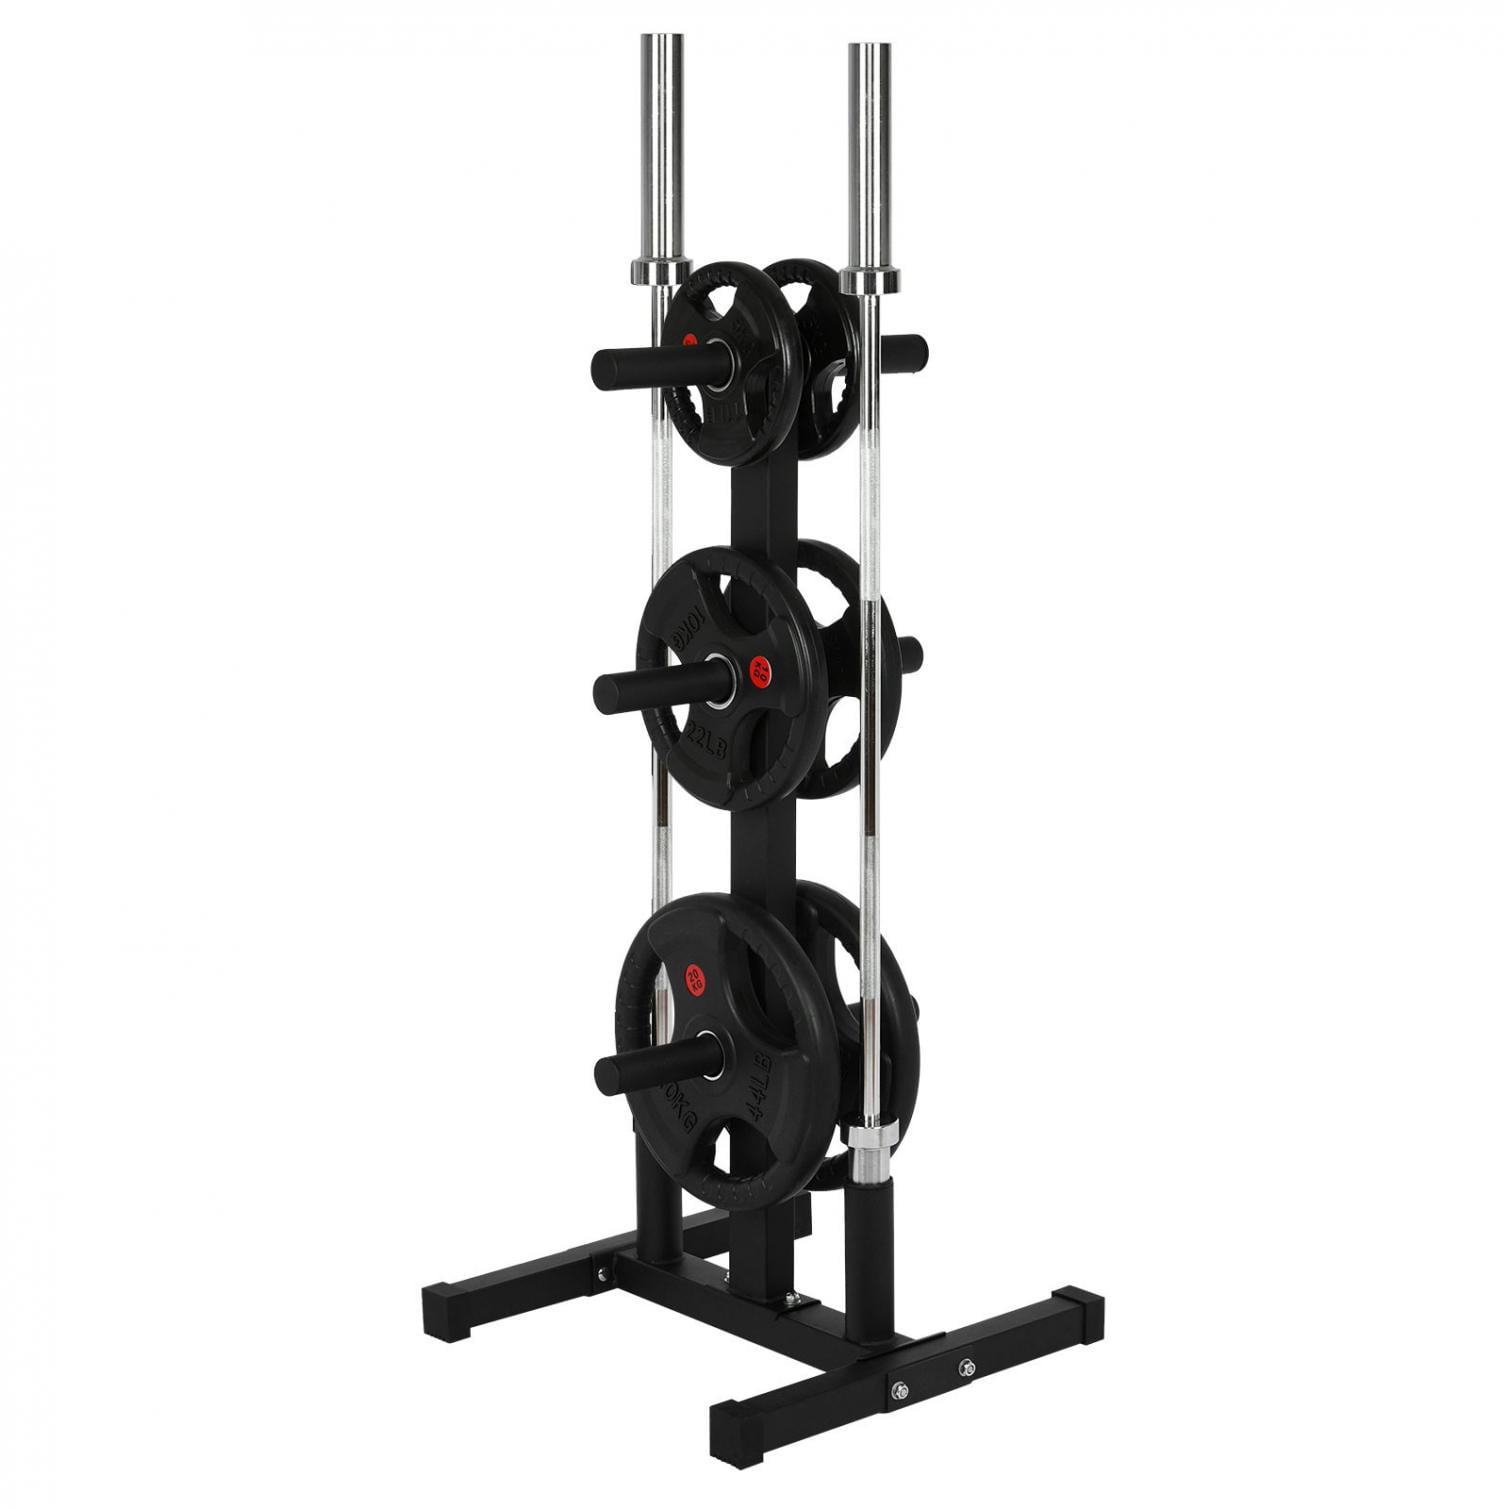 Max Load 400 LBS Weight Plate Barbell Rack Tree Olympic 2 Inch: Weight Plate Tree for Bumper Plates&Barbell Vertical Bar Holder For Home Gym Free Weight Stand Weight Rack for Plates&Barbell 